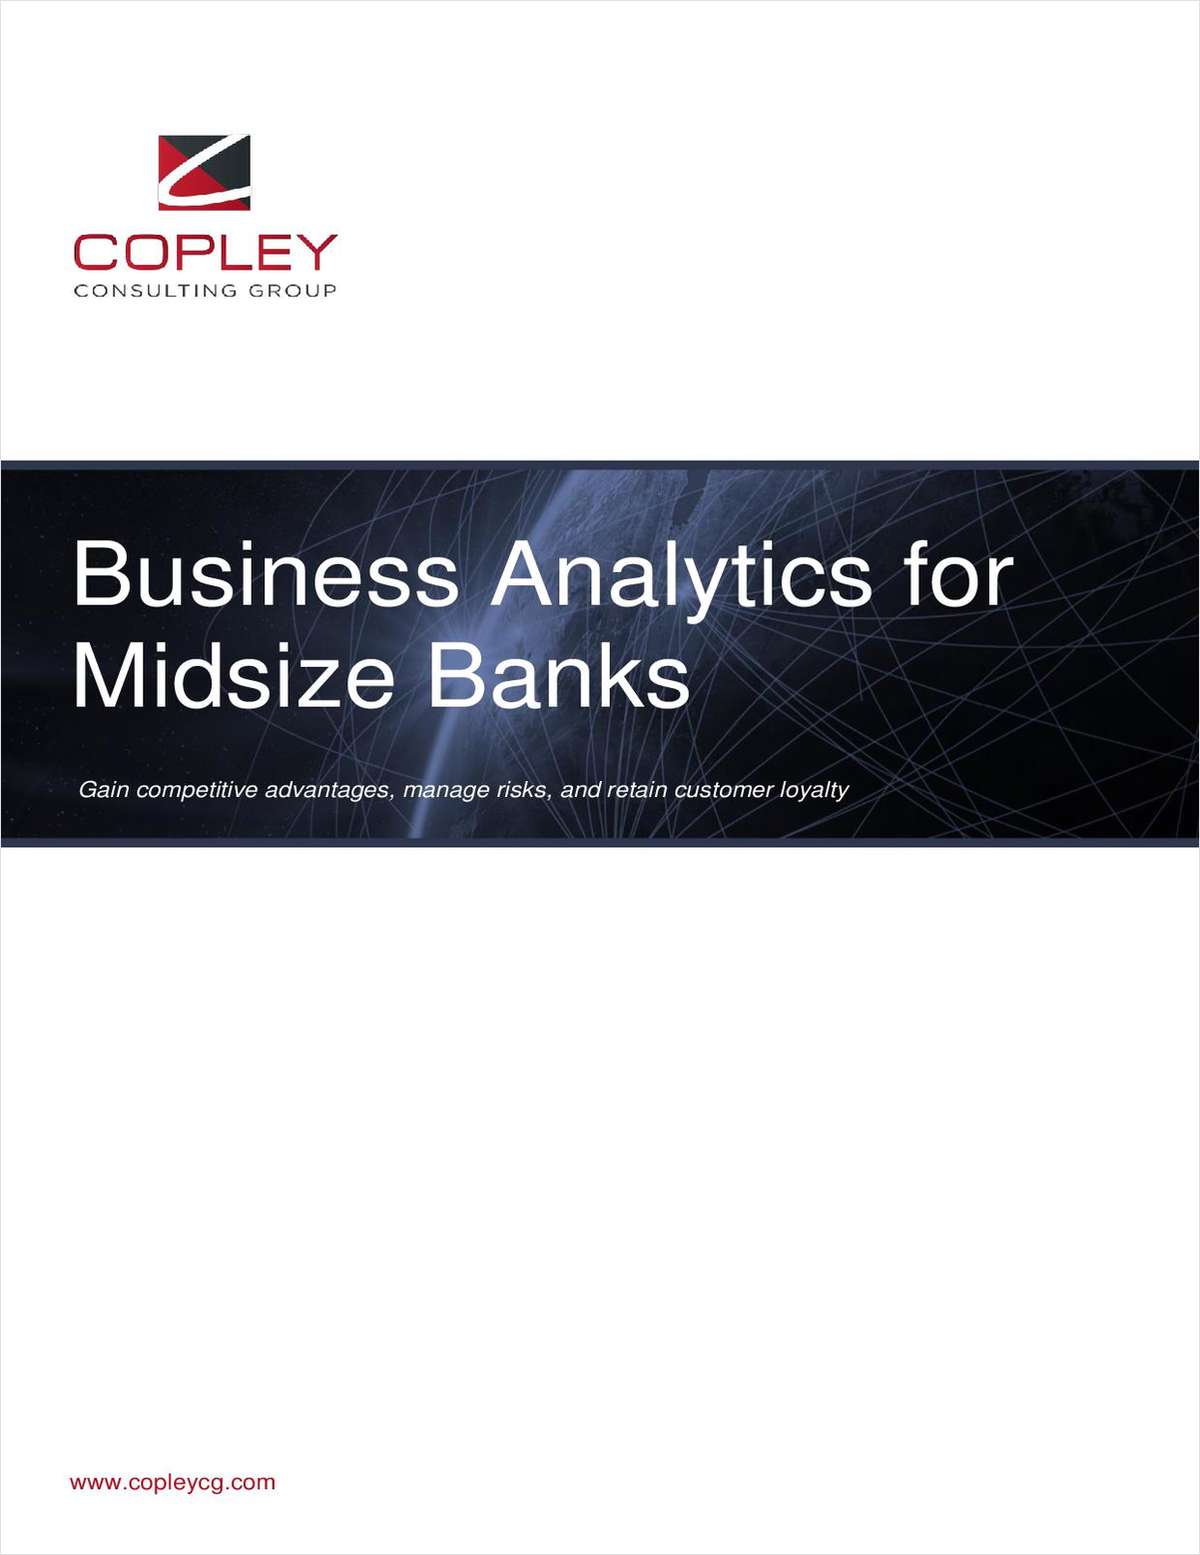 Business Analytics for Midsize Banks